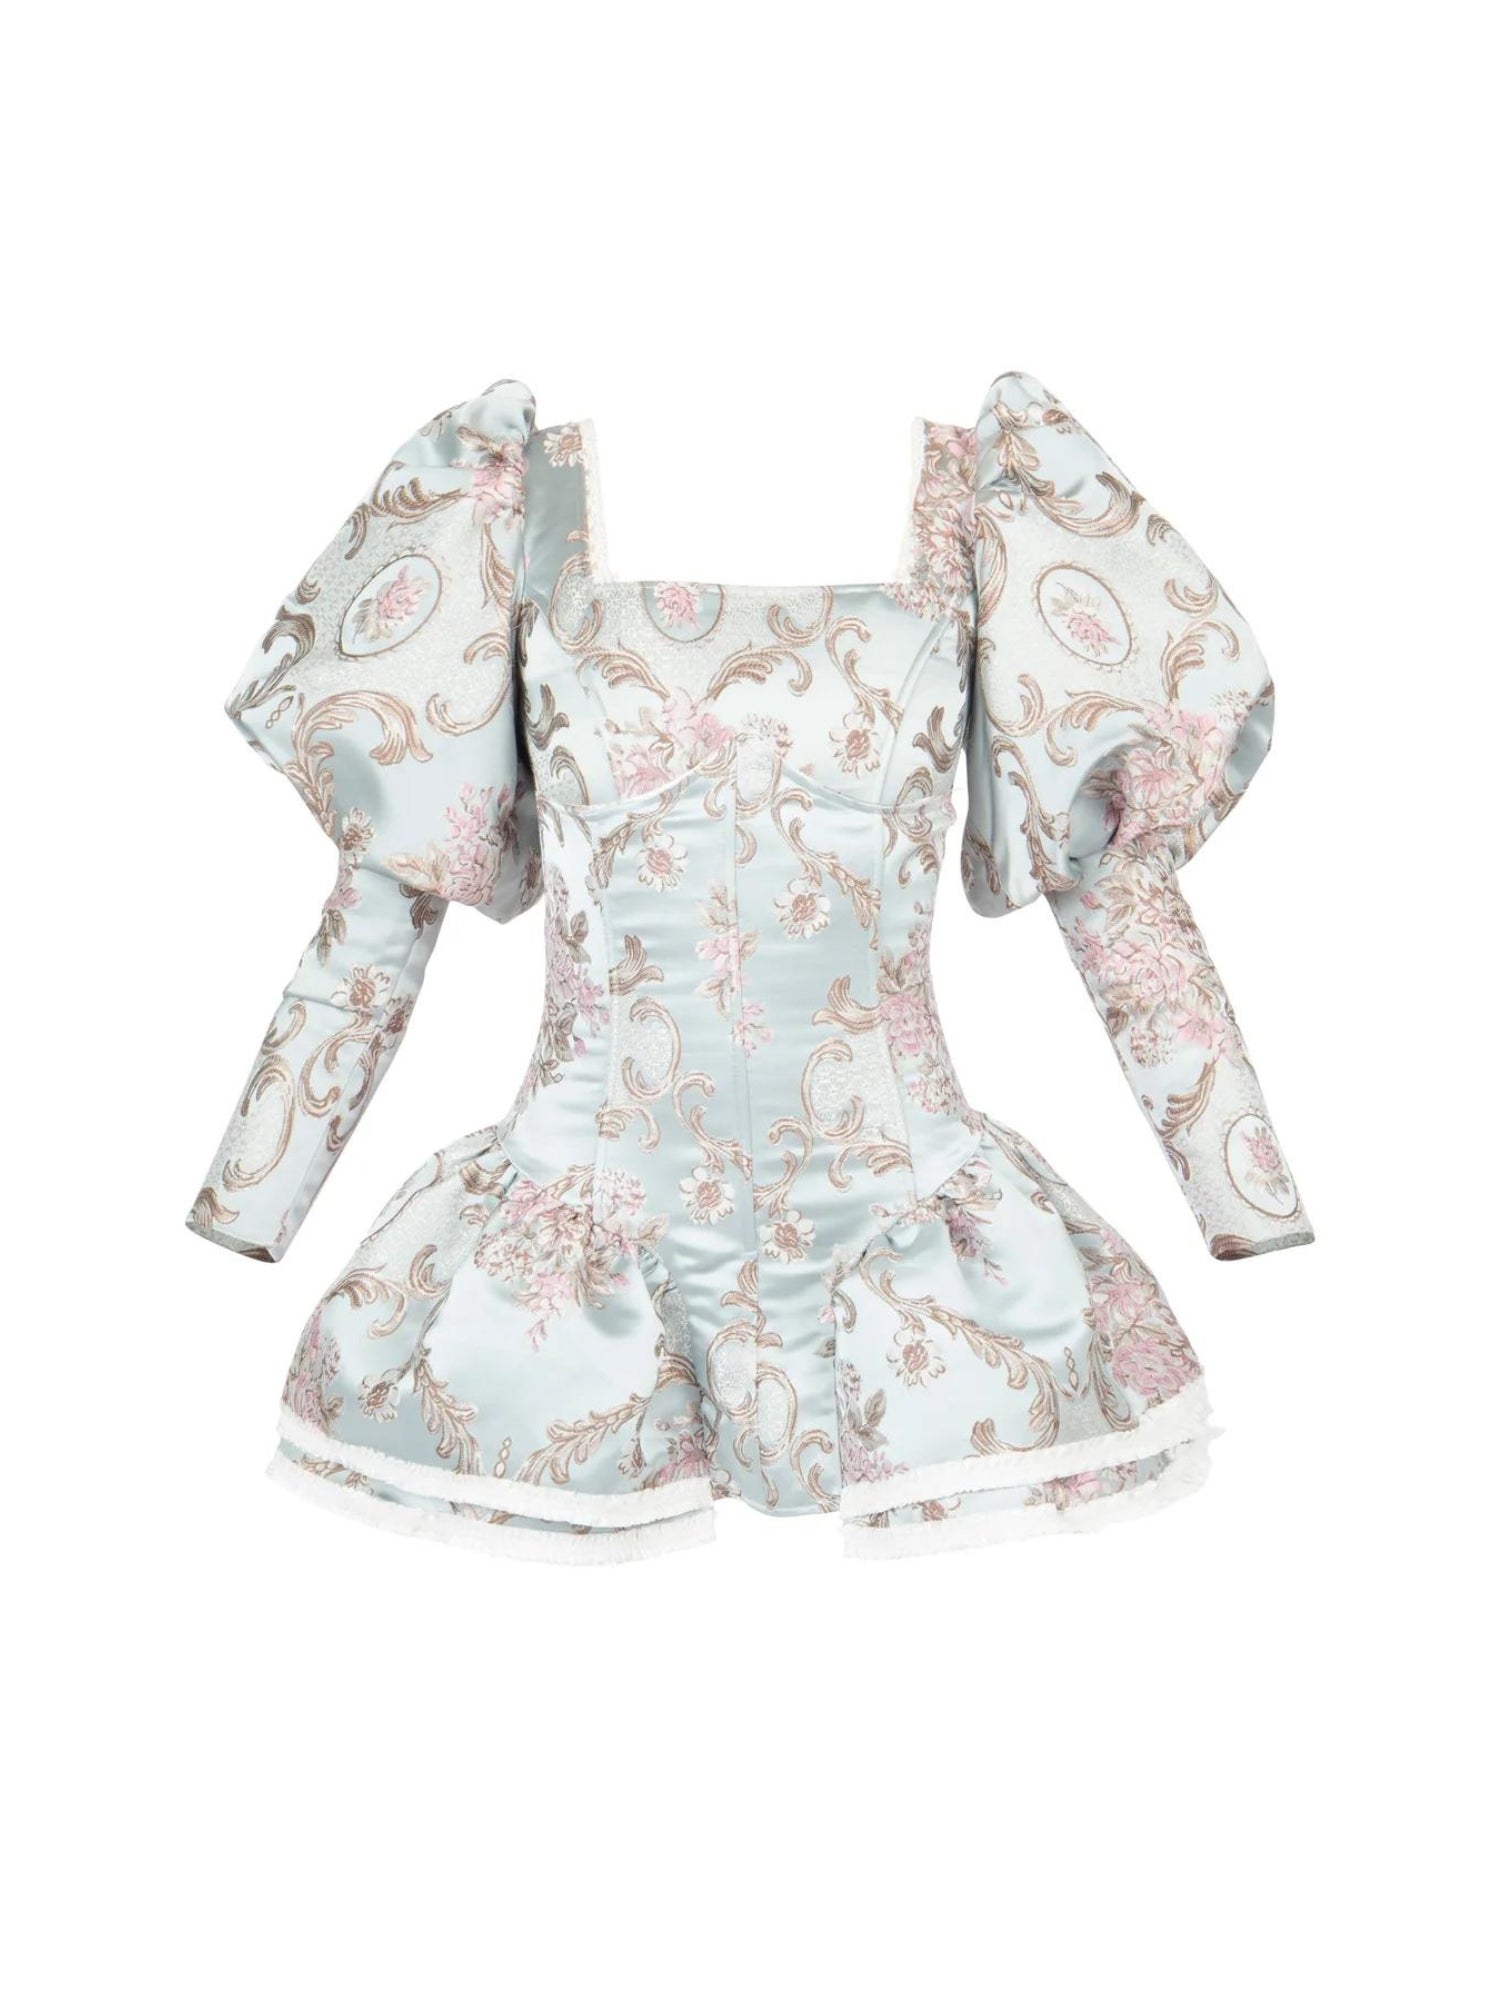 The Duchess Mini Dress, Dresses, Serpenti Apparel - Ivory Sheep Collection Limited